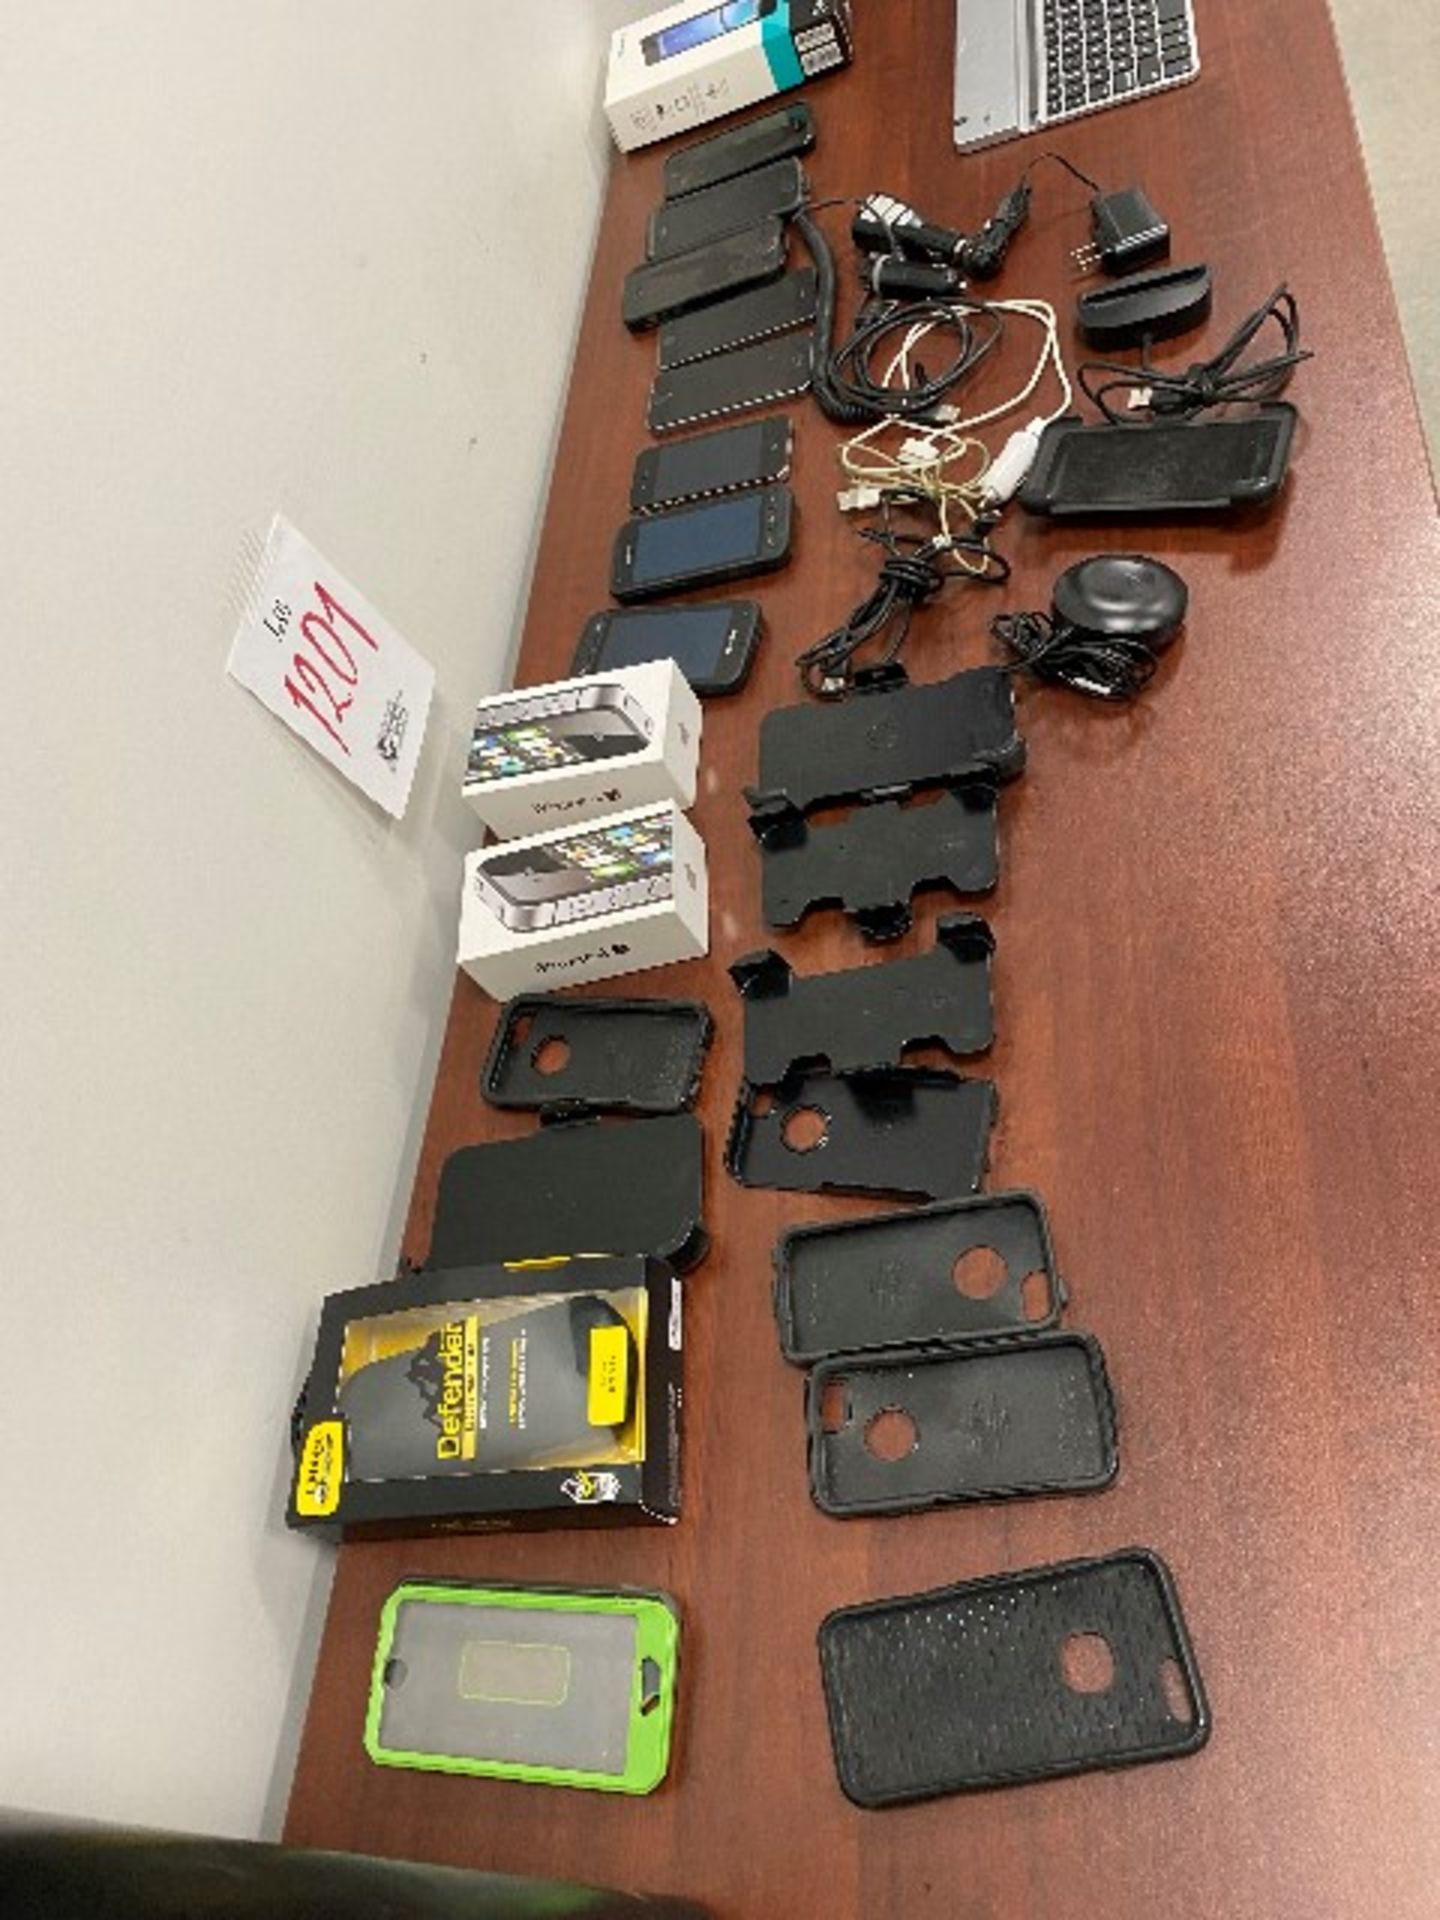 LOT, Assorted cell phones, staplers, accessories, etc...